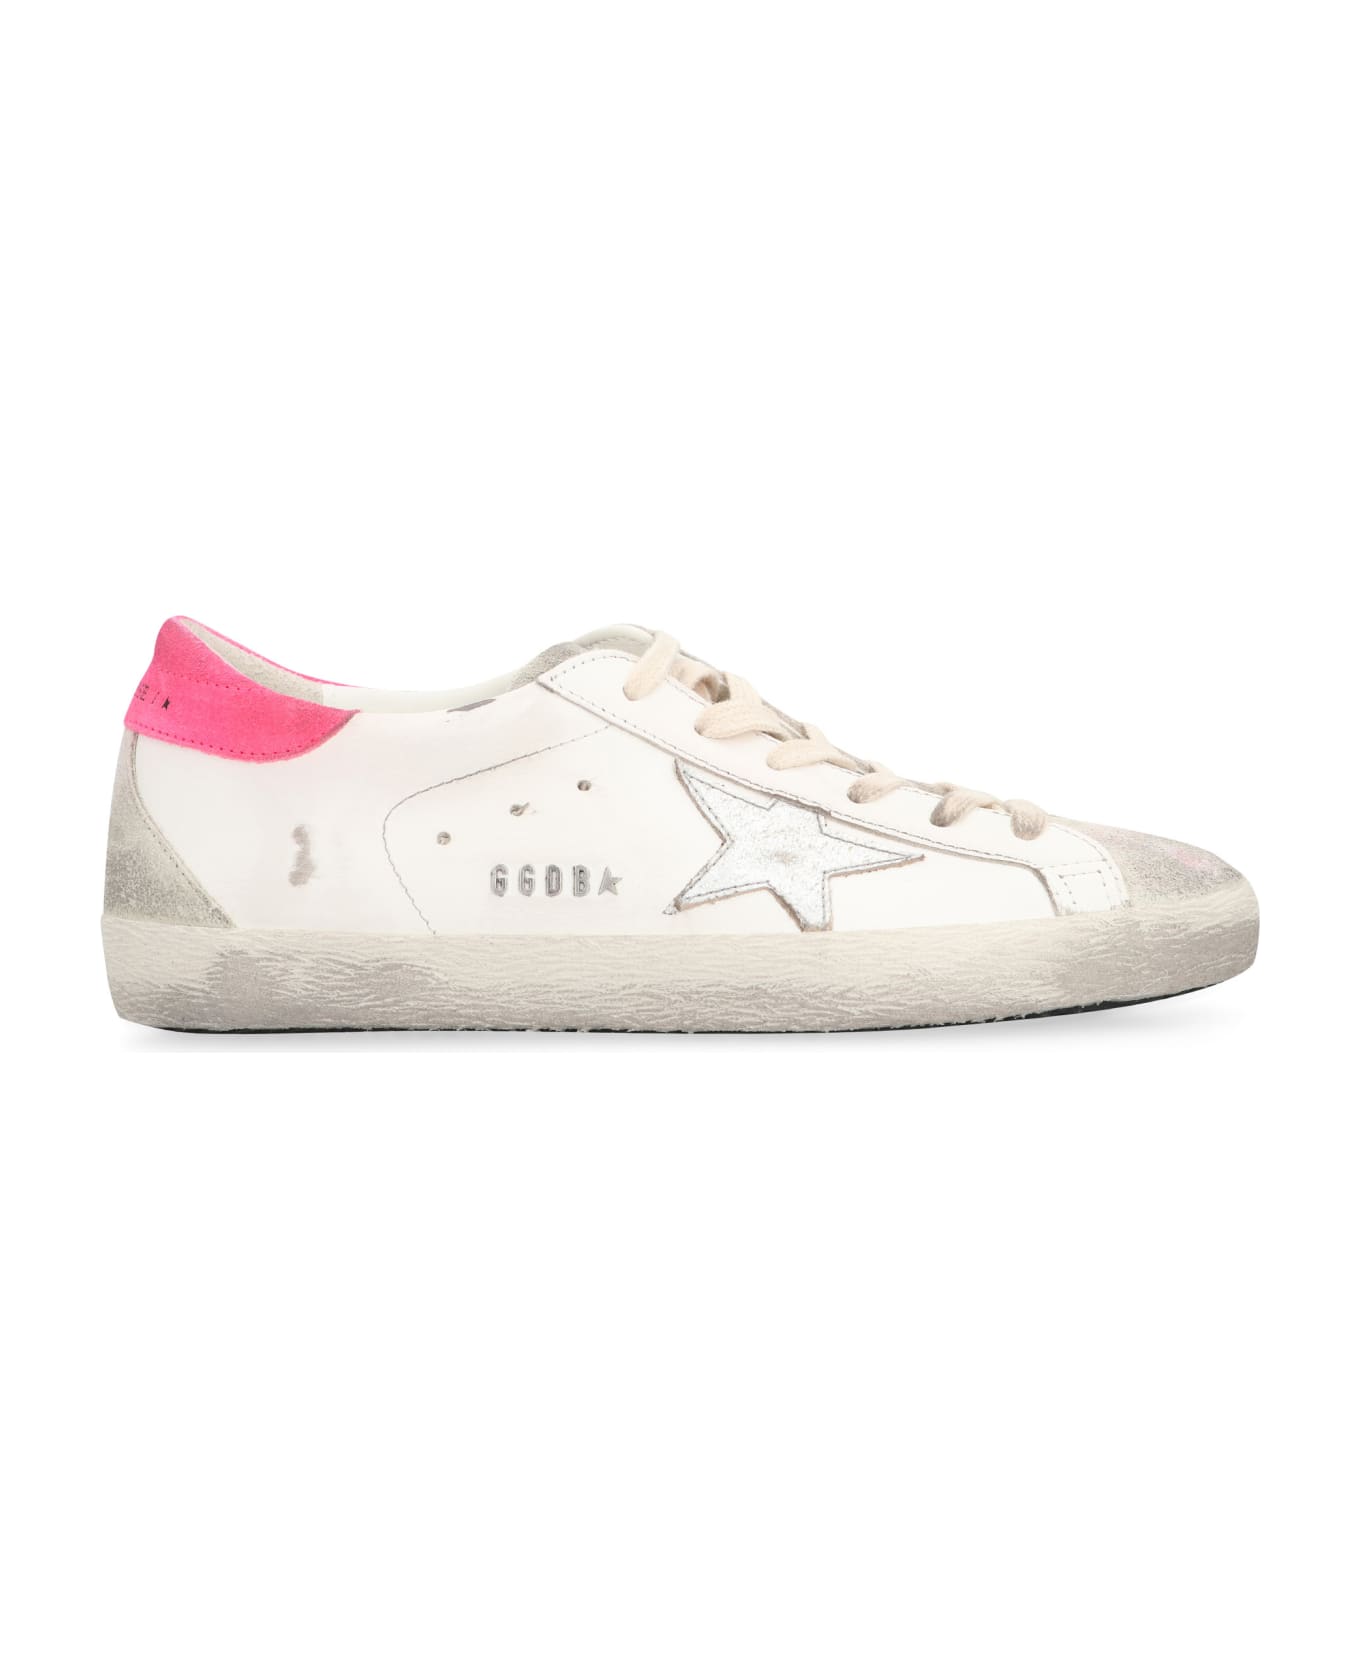 Golden Goose Super-star Leather Low-top Sneakers - White/ice/silver/lobster fluo